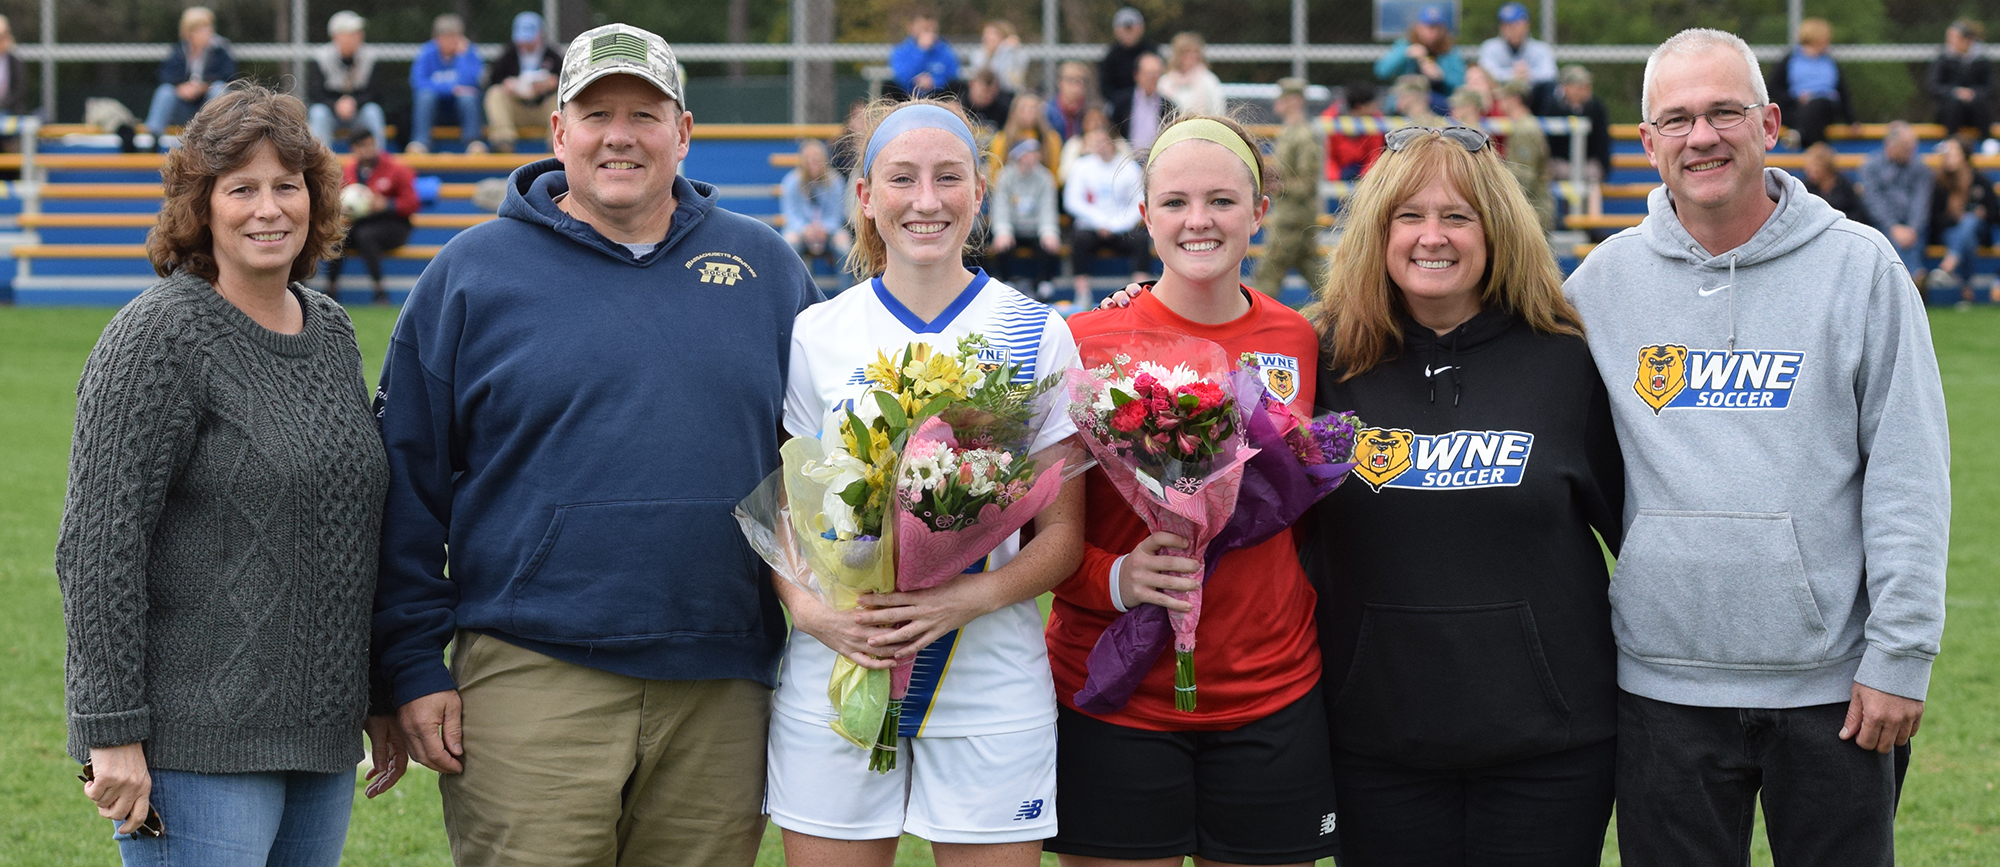 Seniors Erin Grimes and Marissa Veilleux were honored before the start of Western New England's 1-1 draw with UNE on Saturday. (Photo by Rachael Margossian)